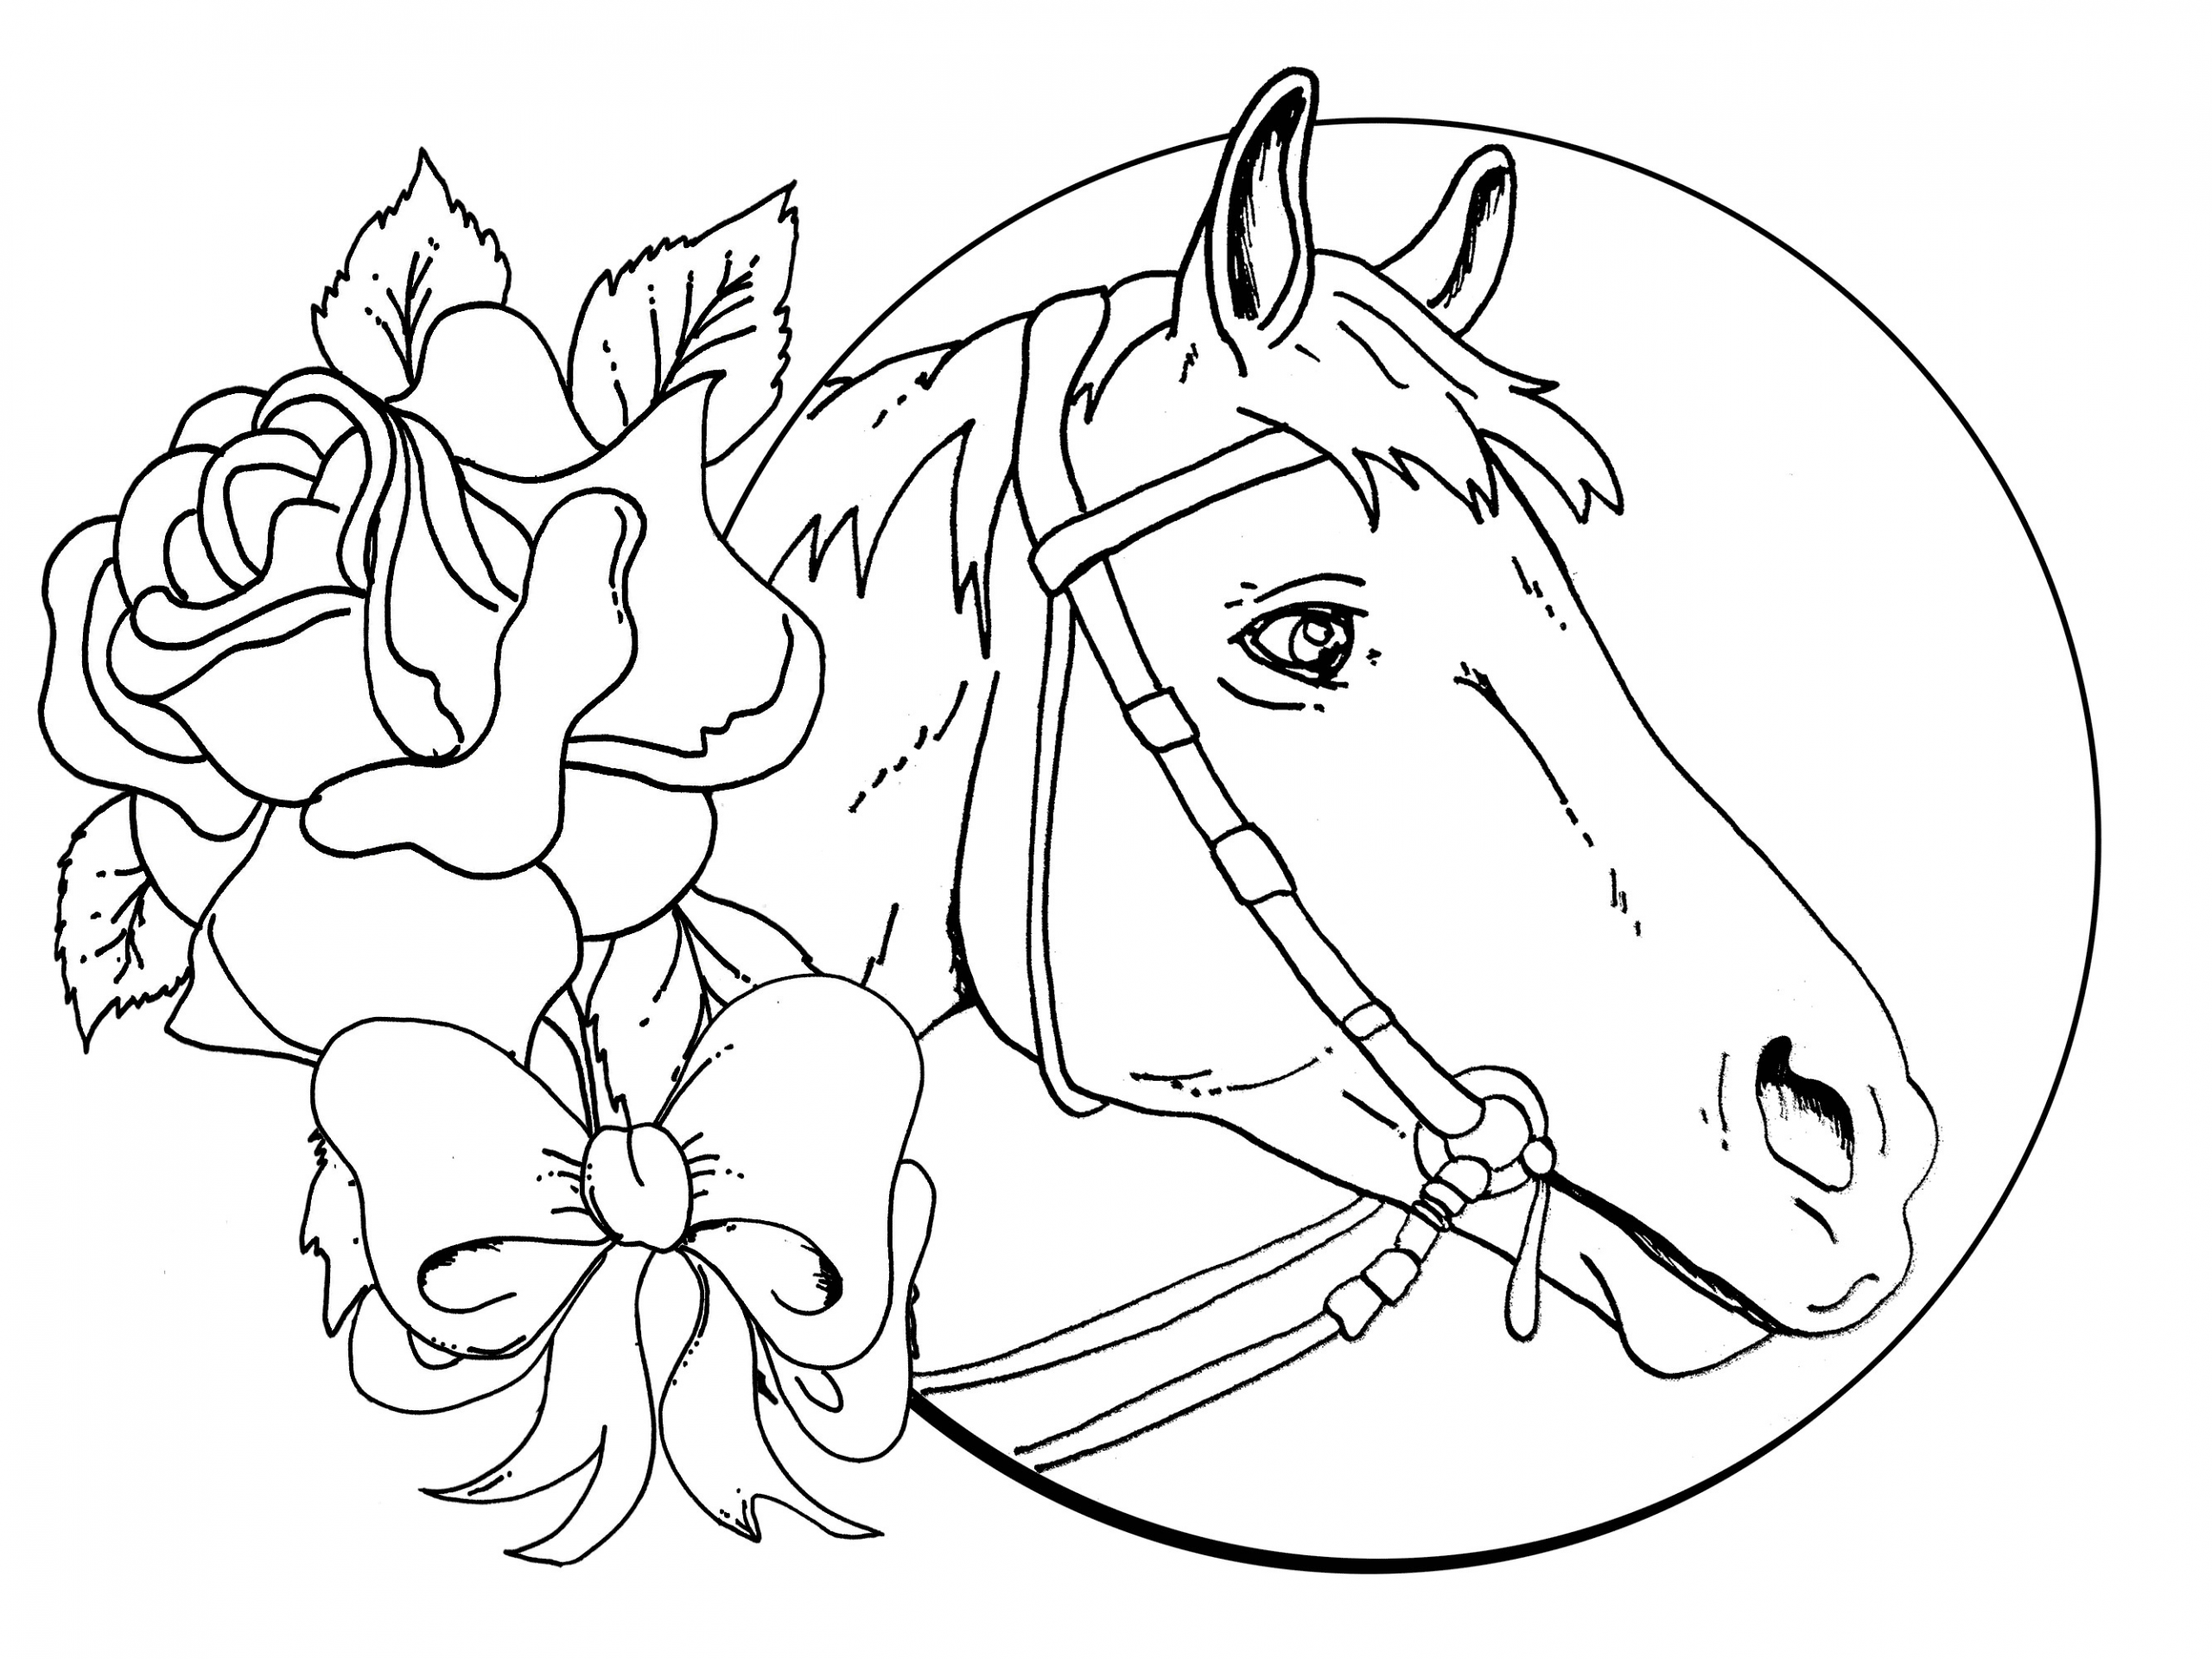 Coloring Sheets Of Girls
 Coloring Pages for Girls Dr Odd